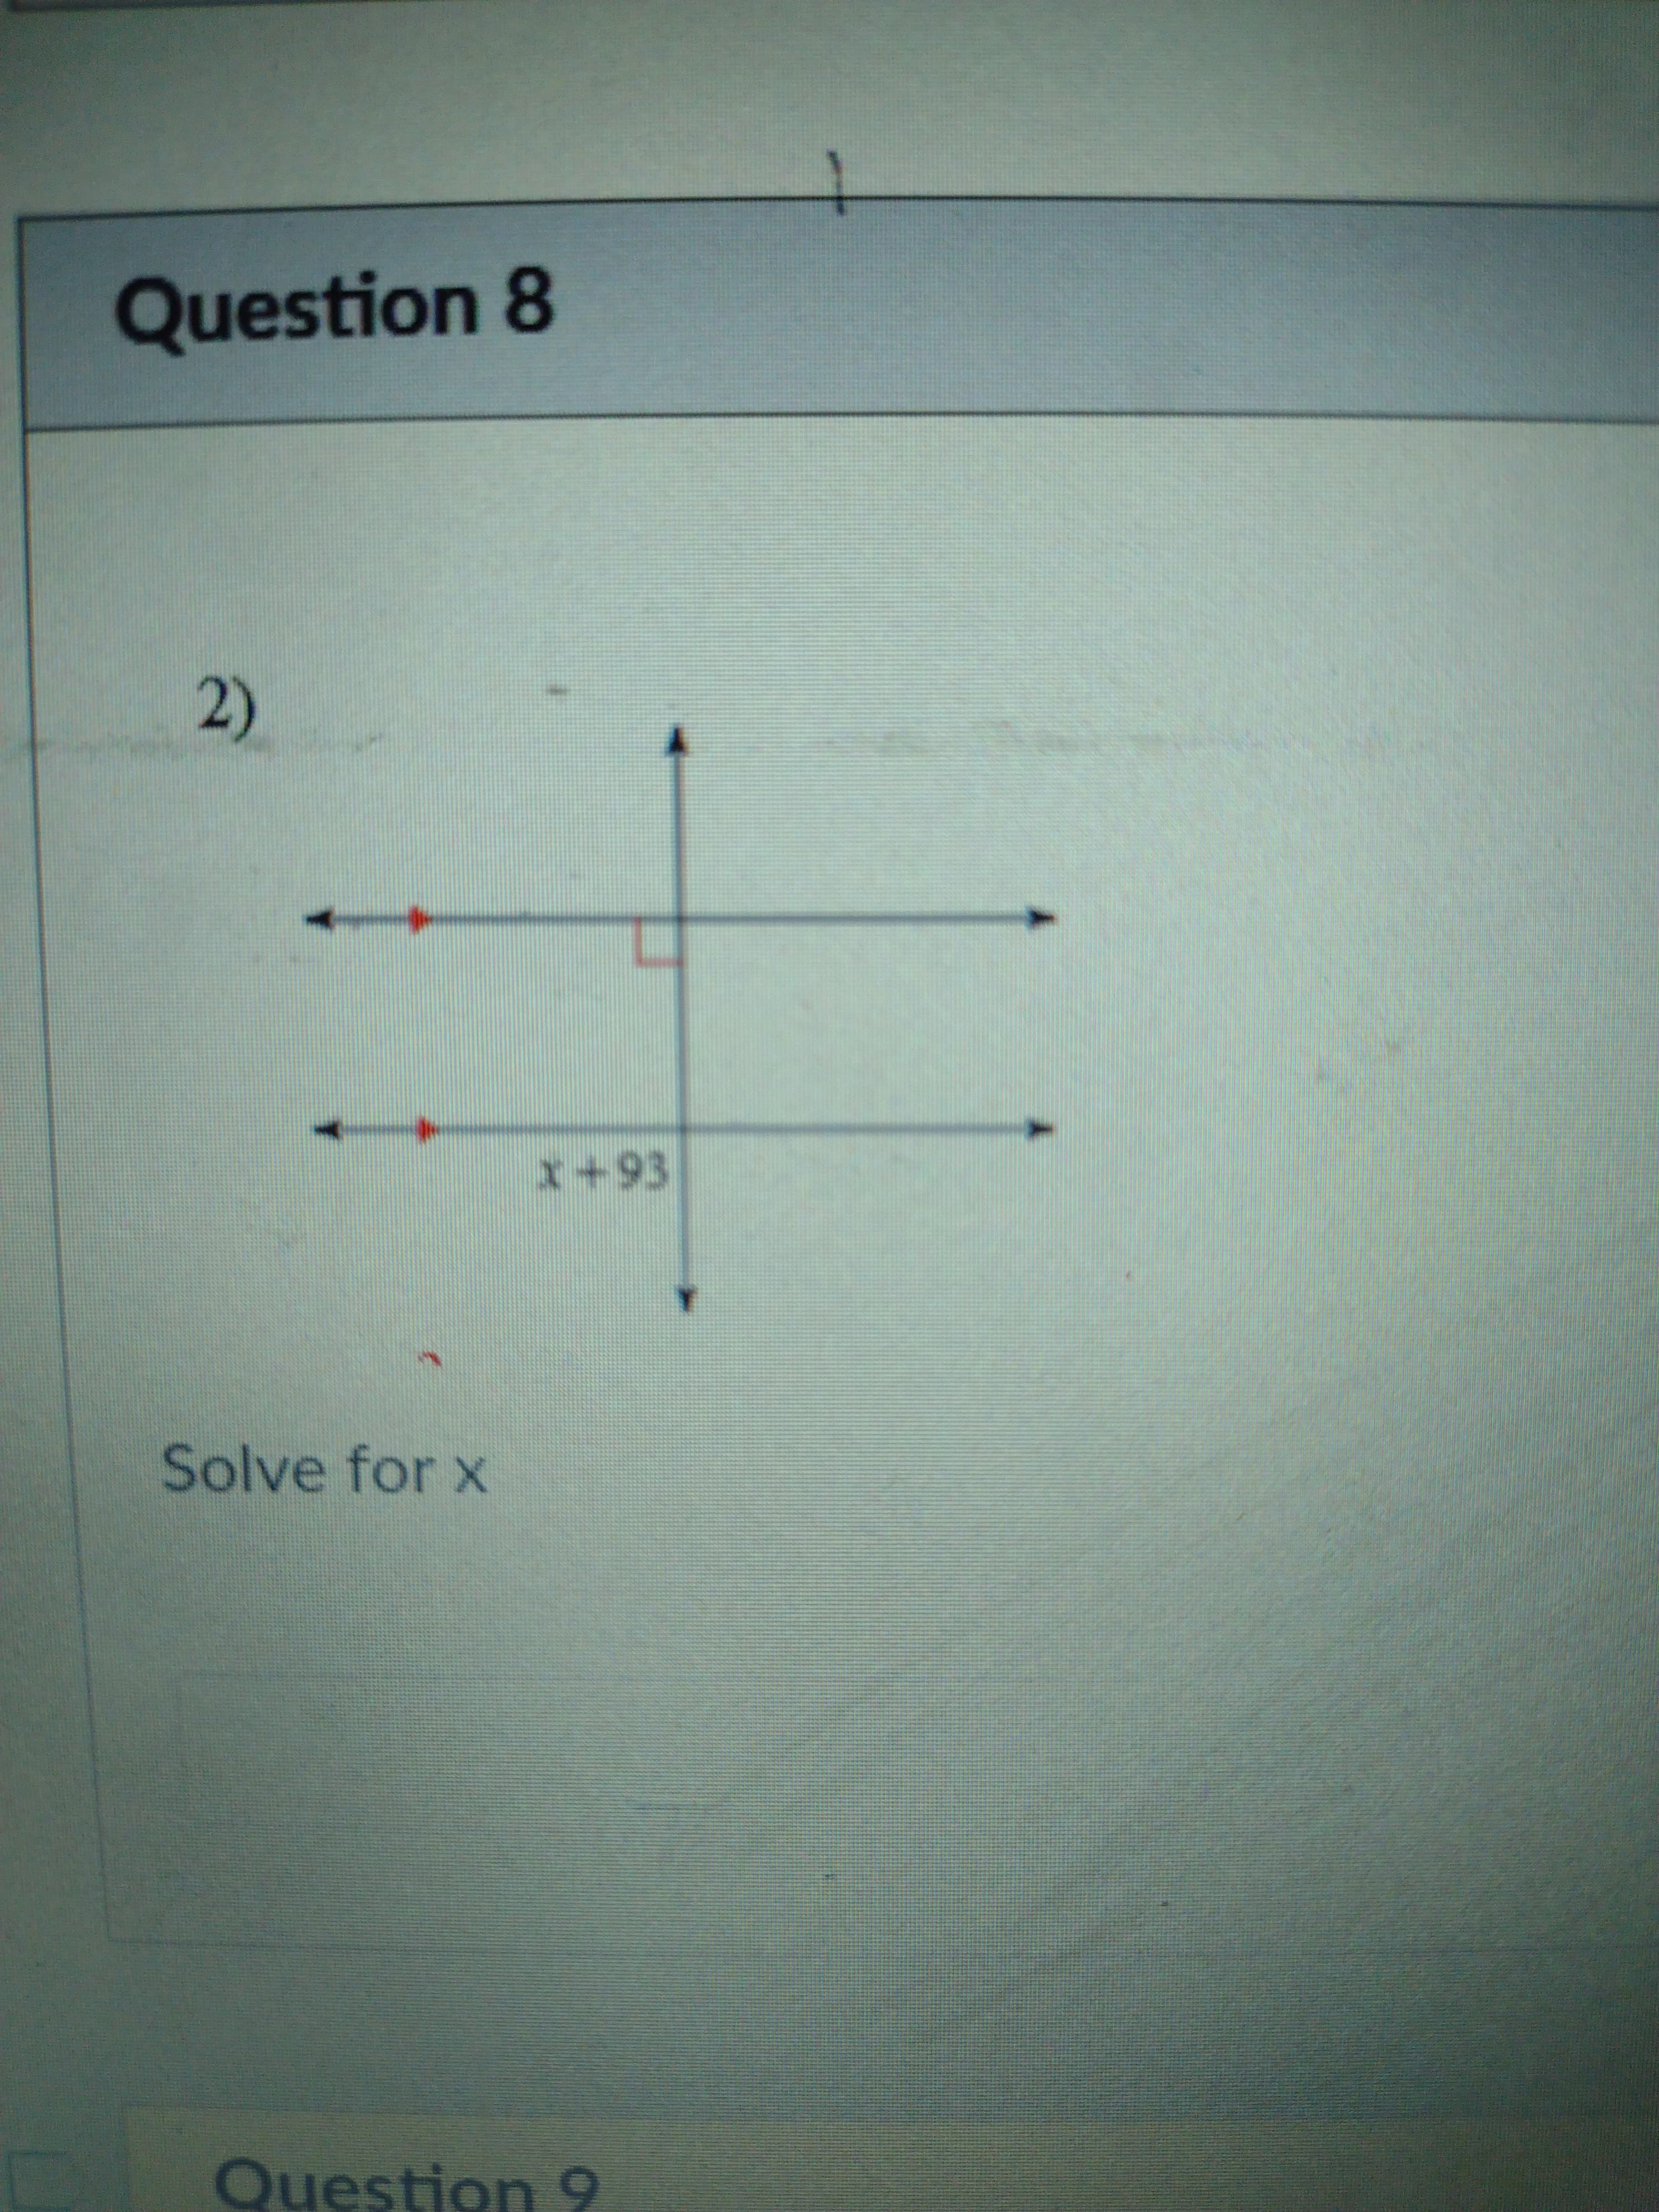 Question 8
2)
Solve for x
Question 9
